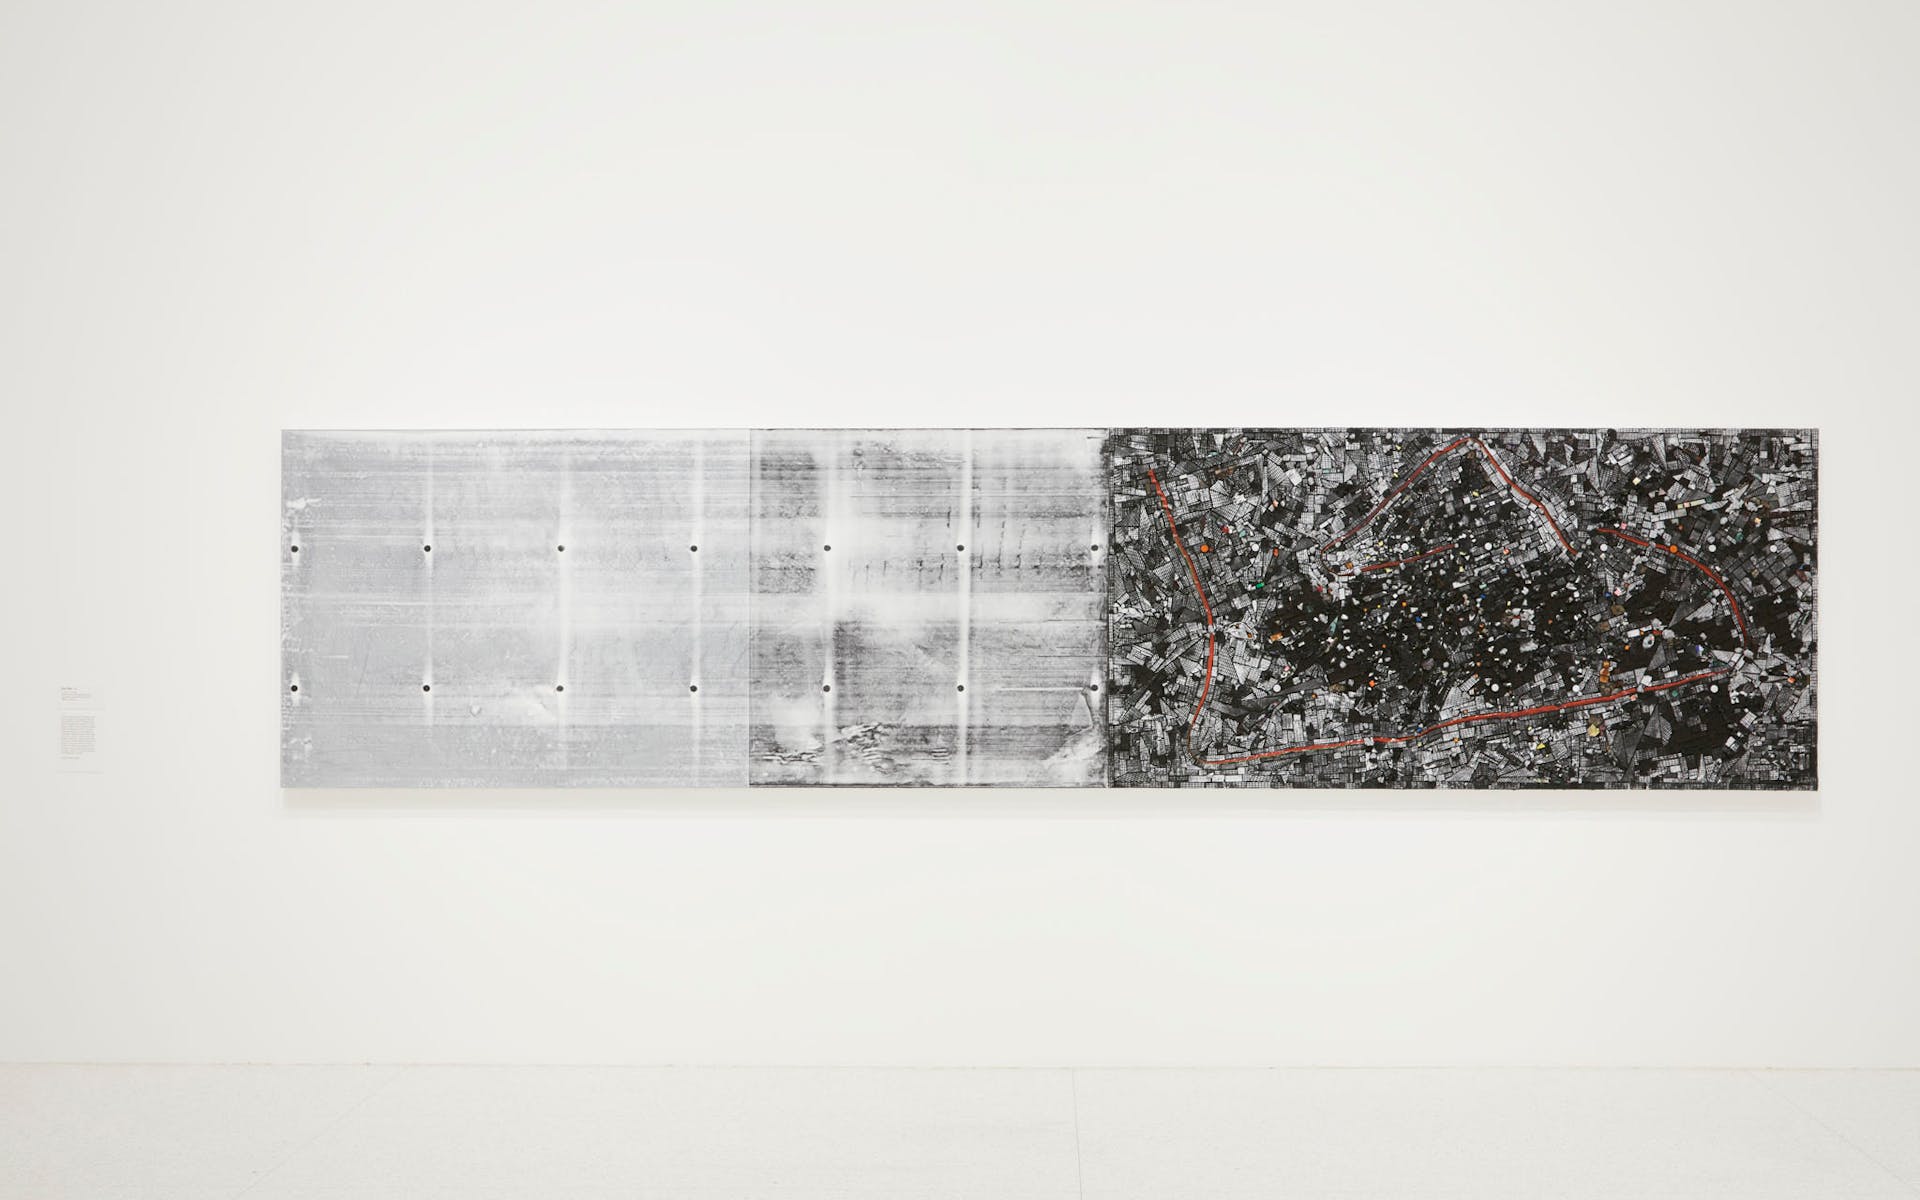 View of the exhibition Jack Whitten: Five Decades of Painting, 2015; Jack Whitten, Soul Map, 2015